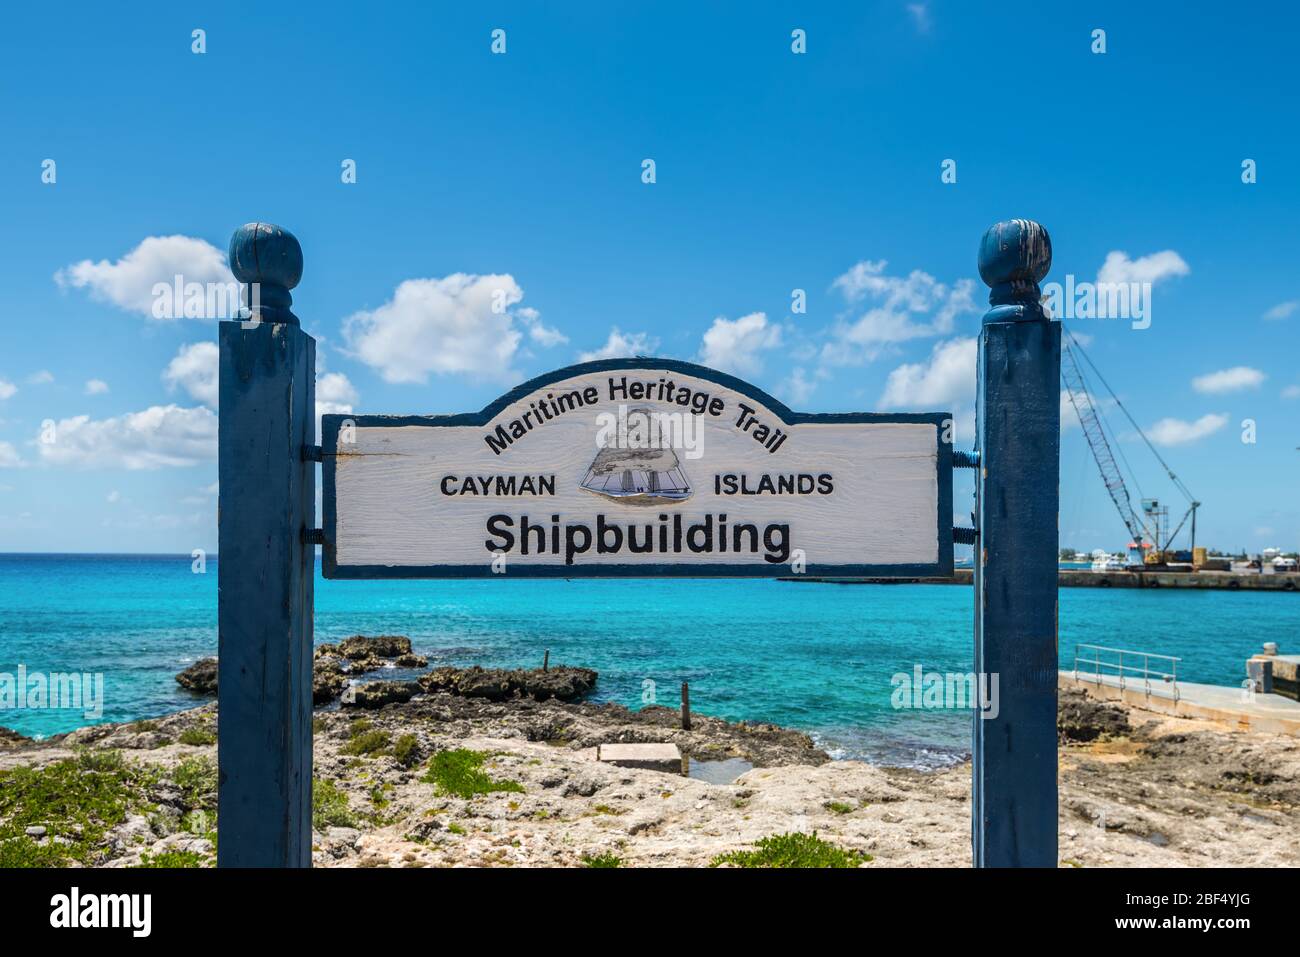 George Town, Grand Cayman Island, UK - April 23, 2019: Sign of Shipbuilding on Maritime Heritage Trail, a driving route through Cayman’s maritime site Stock Photo